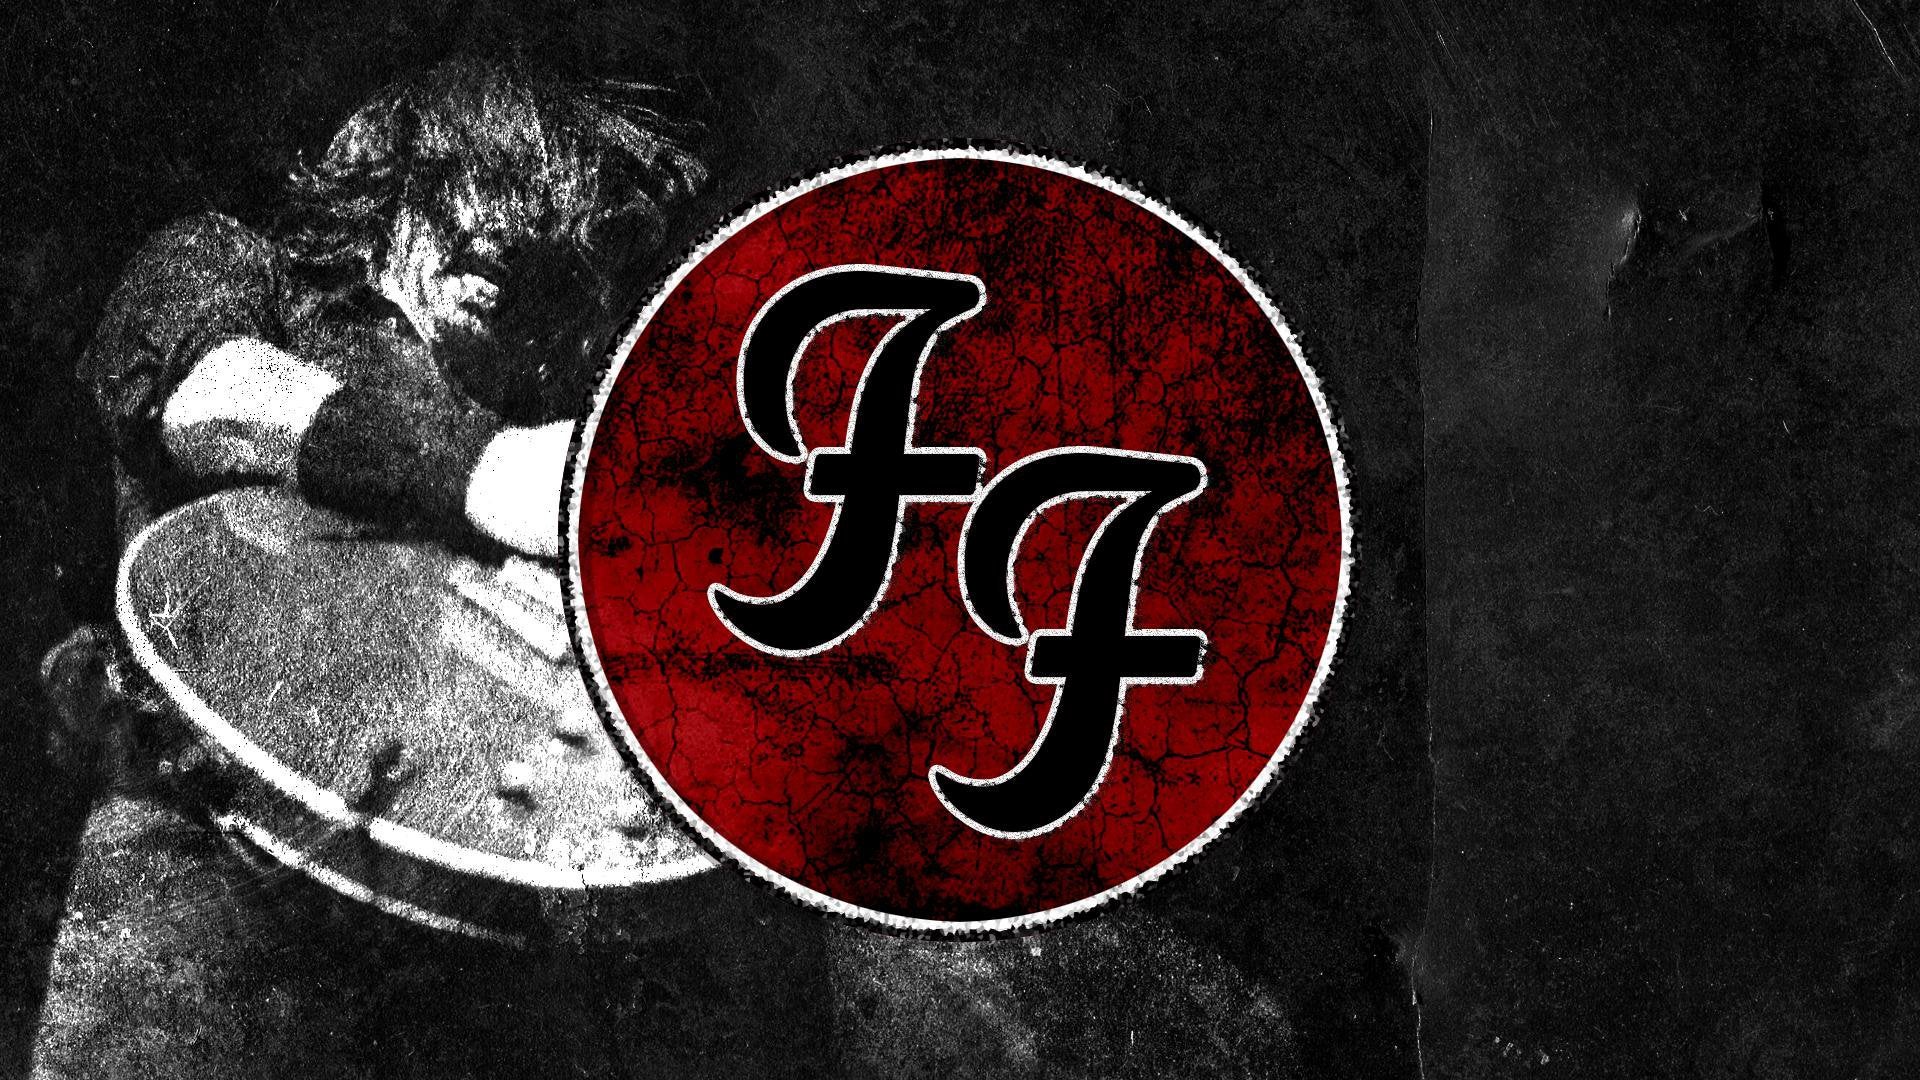 Tried making a wallpaper what do you think rfoofighters